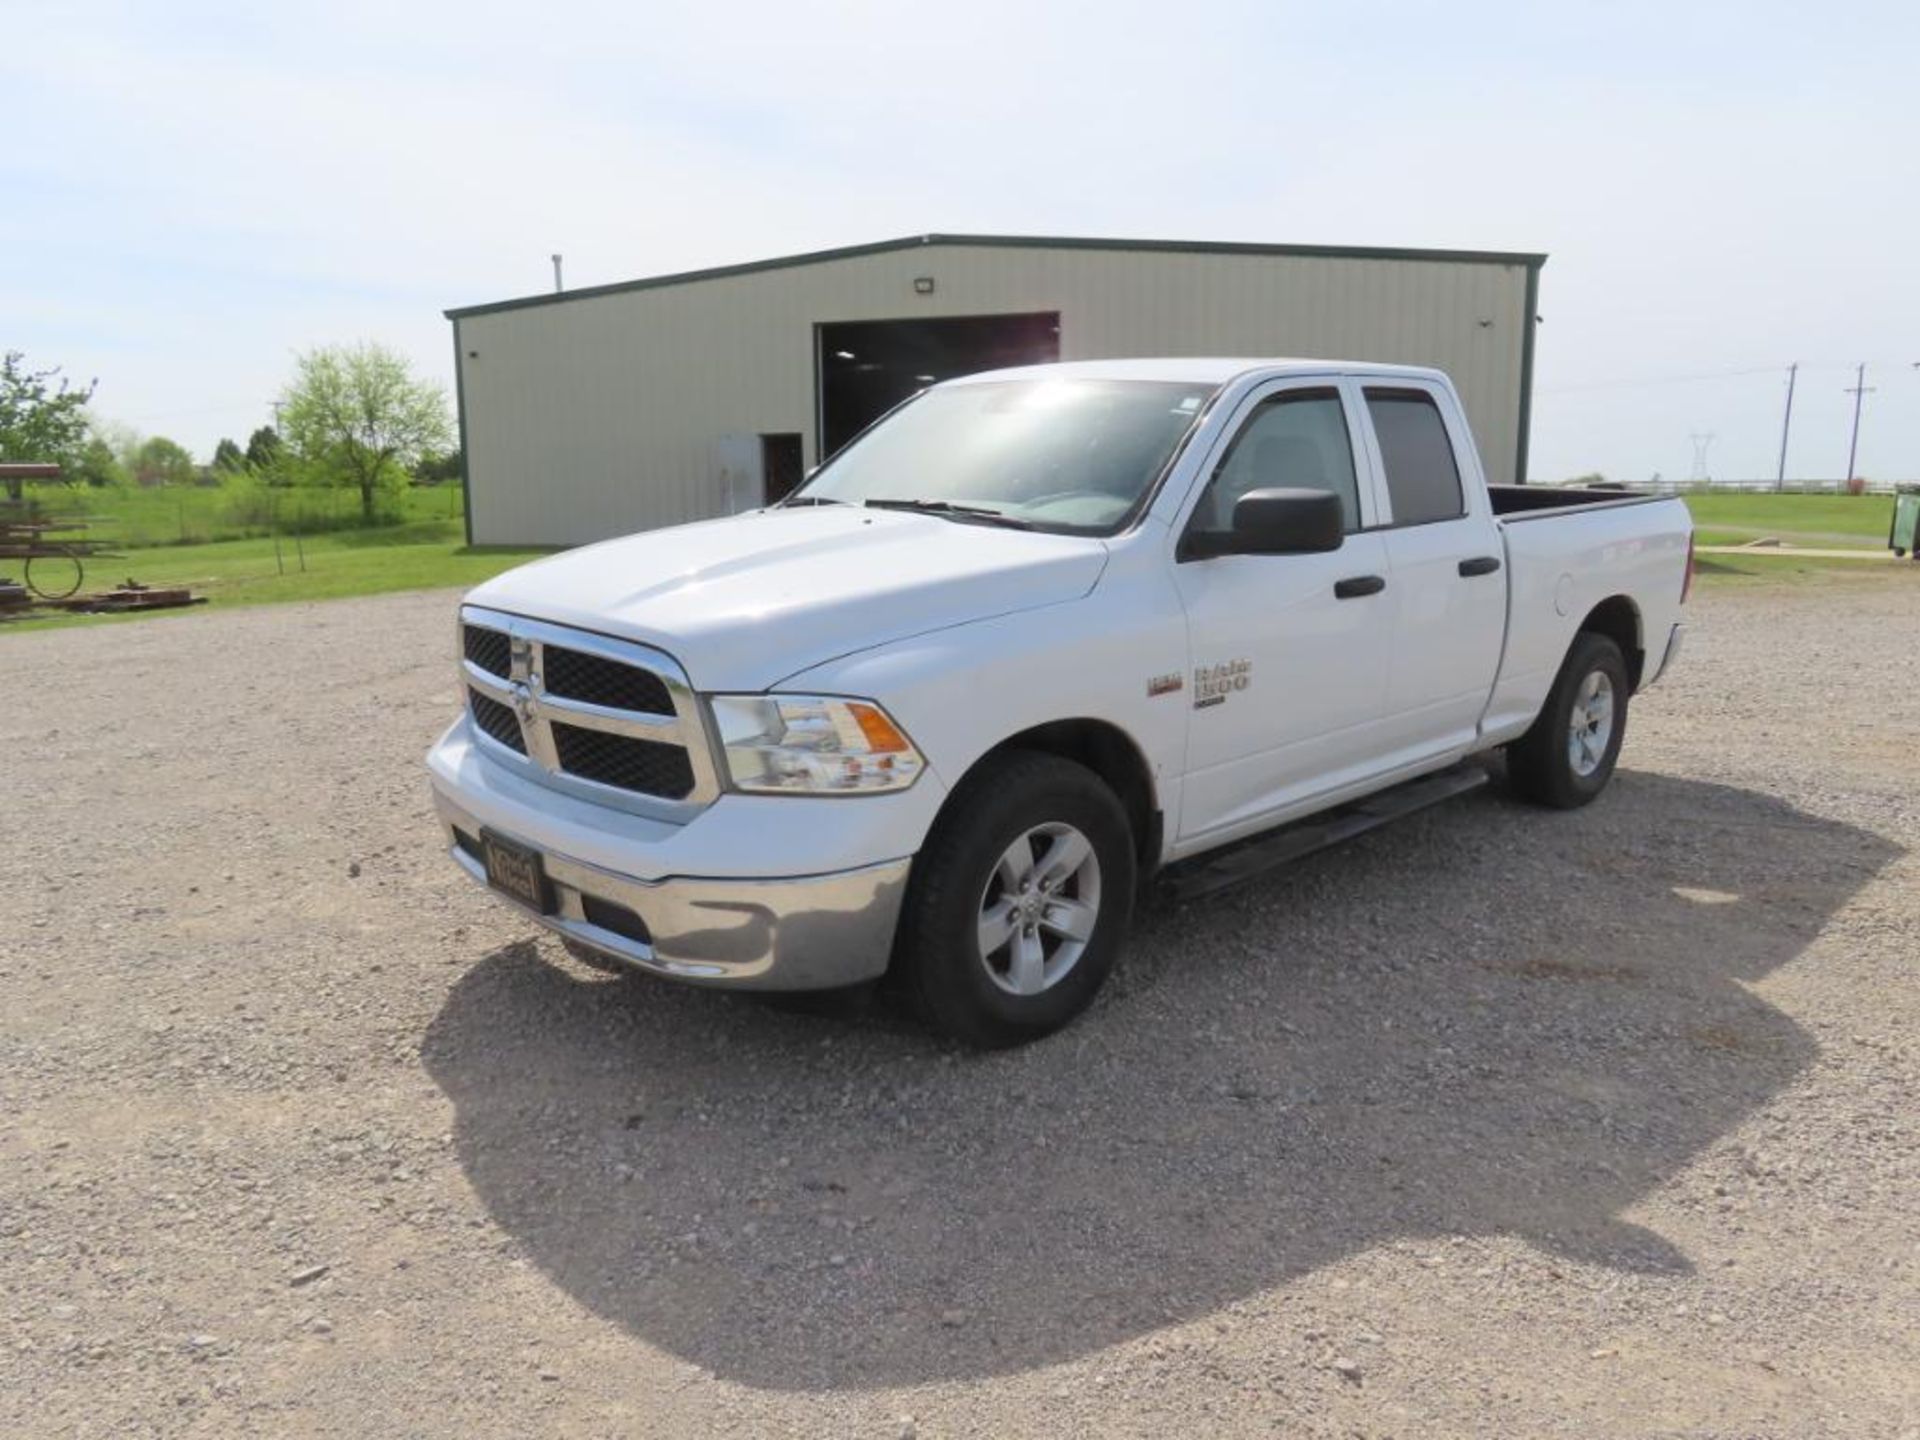 2019 RAM 1500 CLASSIC EXT. CAB PICKUP, VIN# 1C6RR6FT6KS723075, APPROX. 24,400 MILES, STD. BED, SPRAY - Image 2 of 9